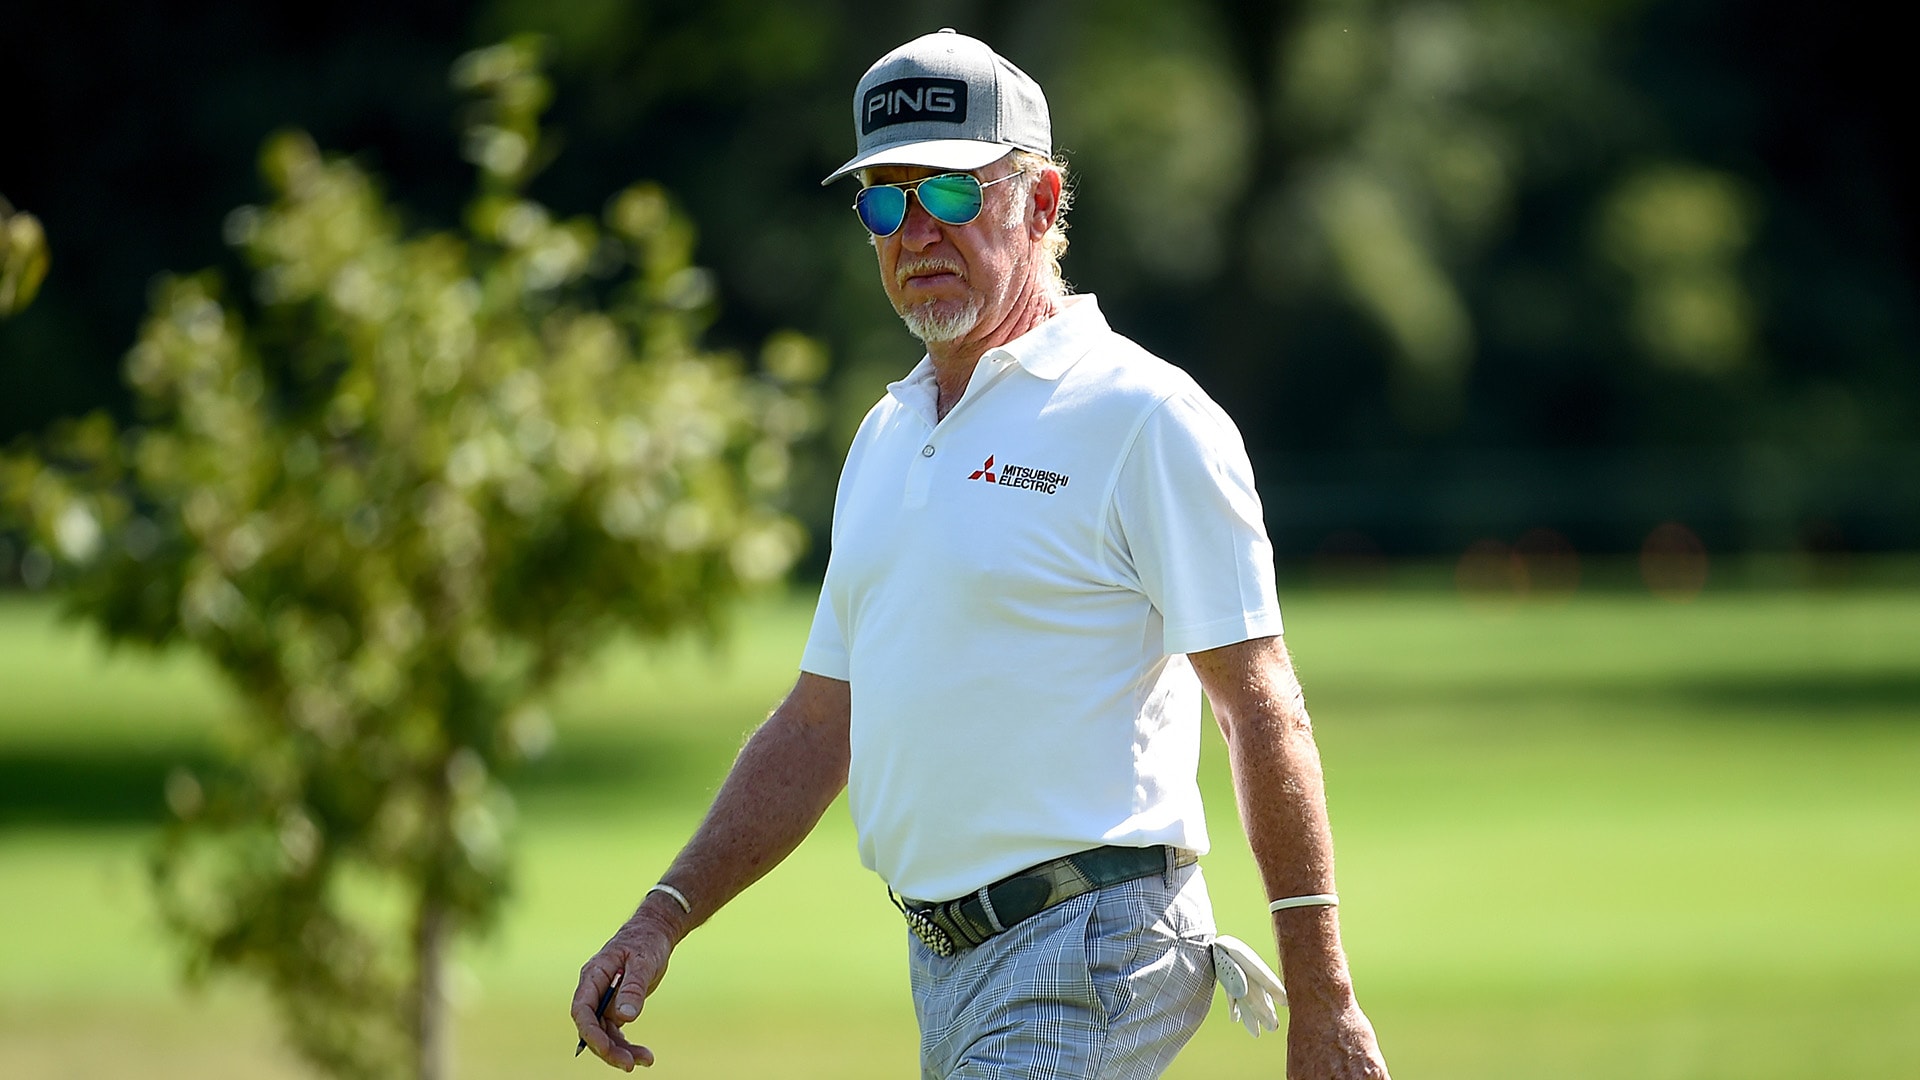 Miguel Angel Jimenez completes wire-to-wire win at Sanford International